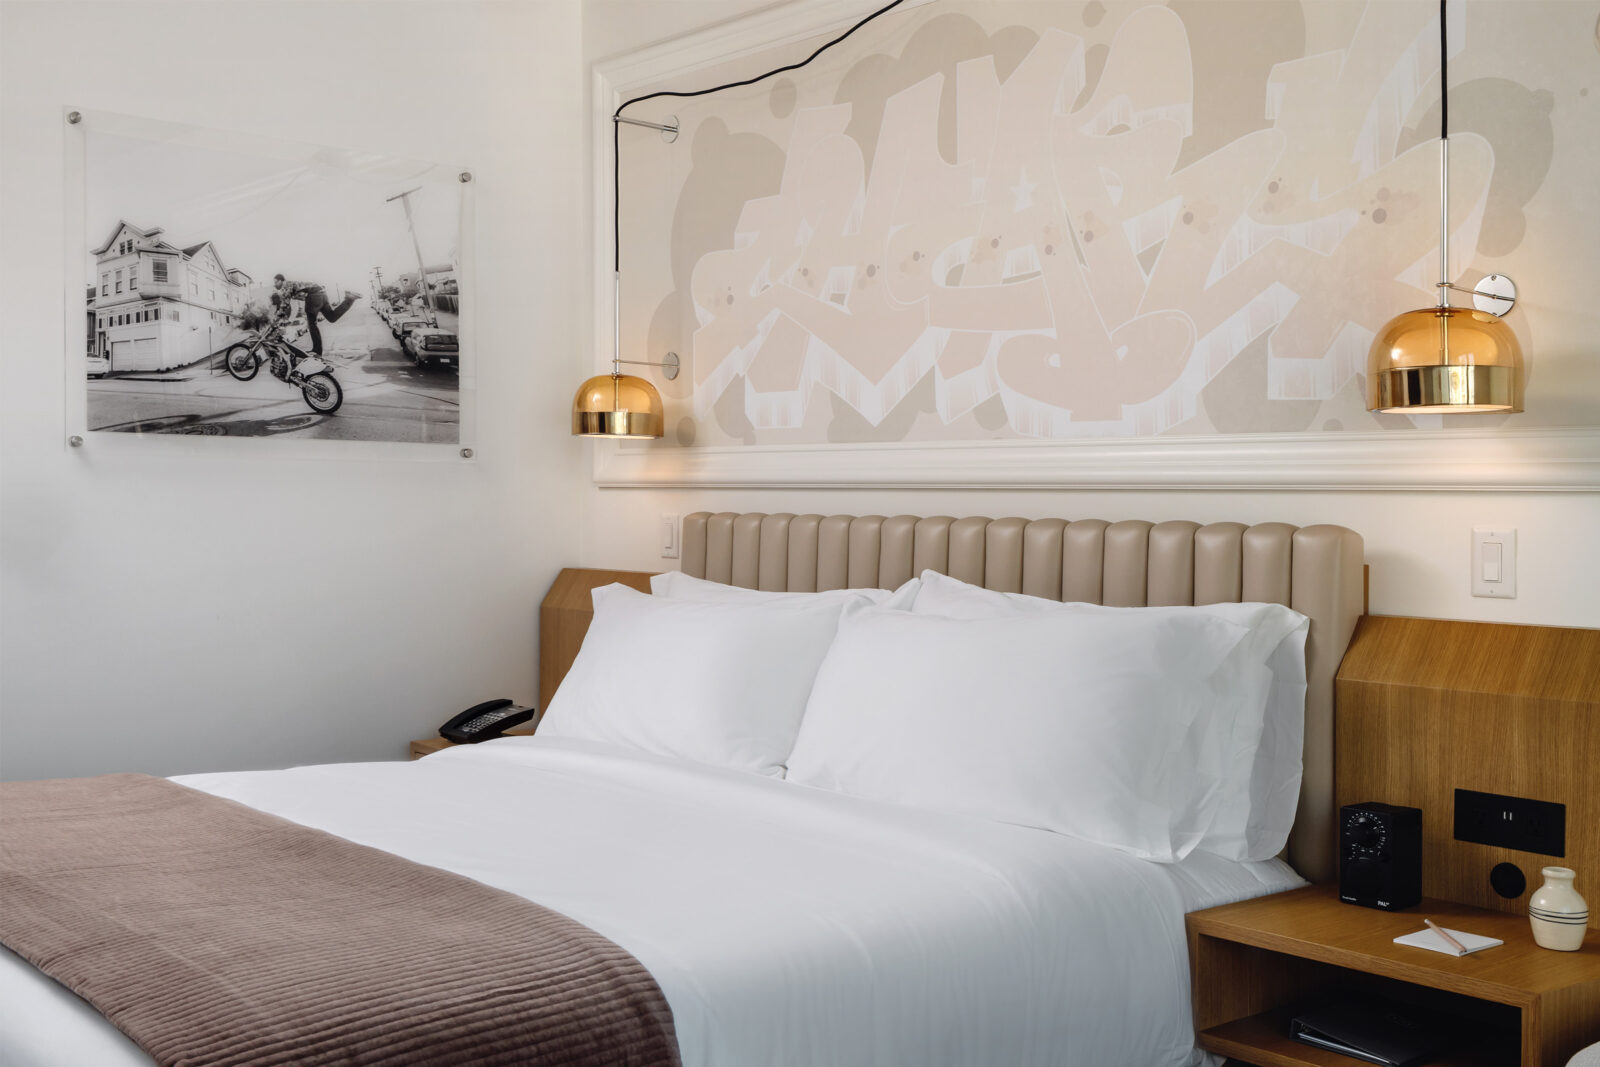 The hotel room contains a king-sized bed with a portrait adorning the left wall.